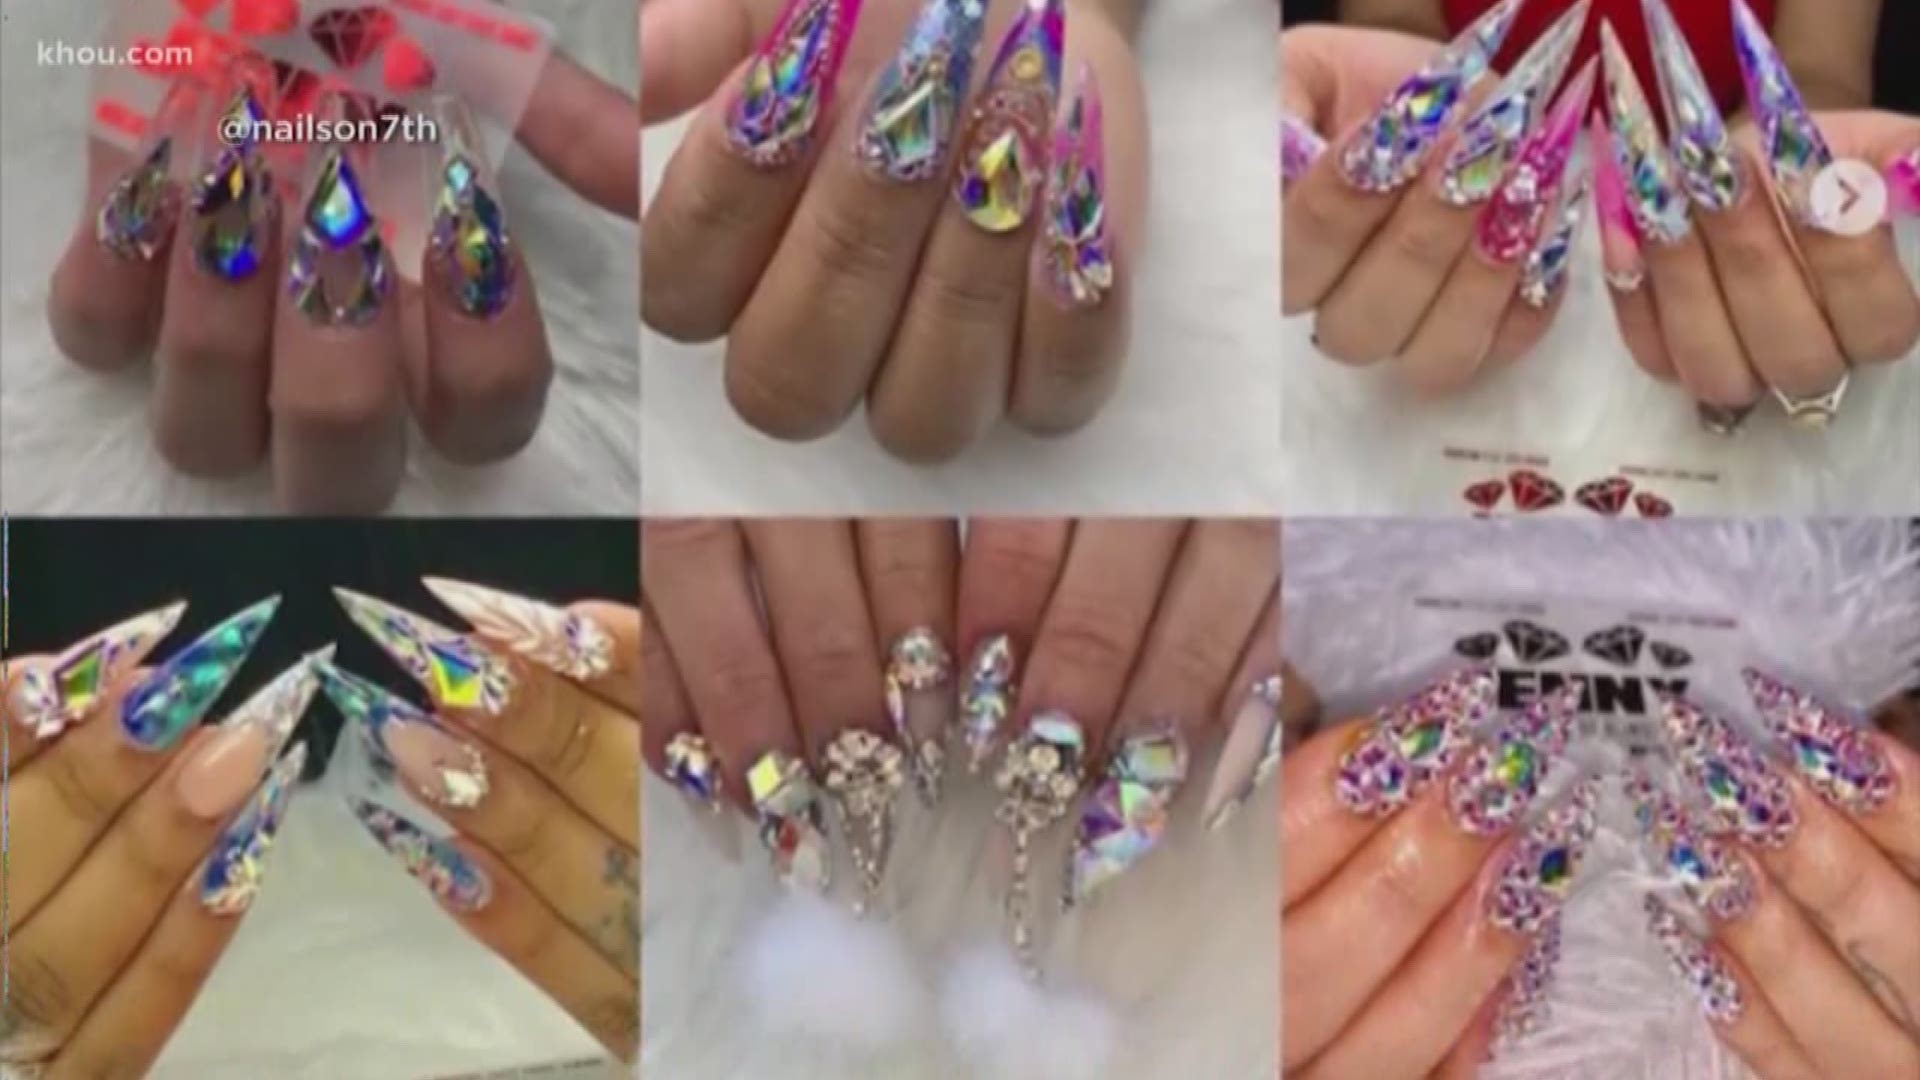 How to get nails like Cardi B? Visit... - ABC30 Action News | Facebook